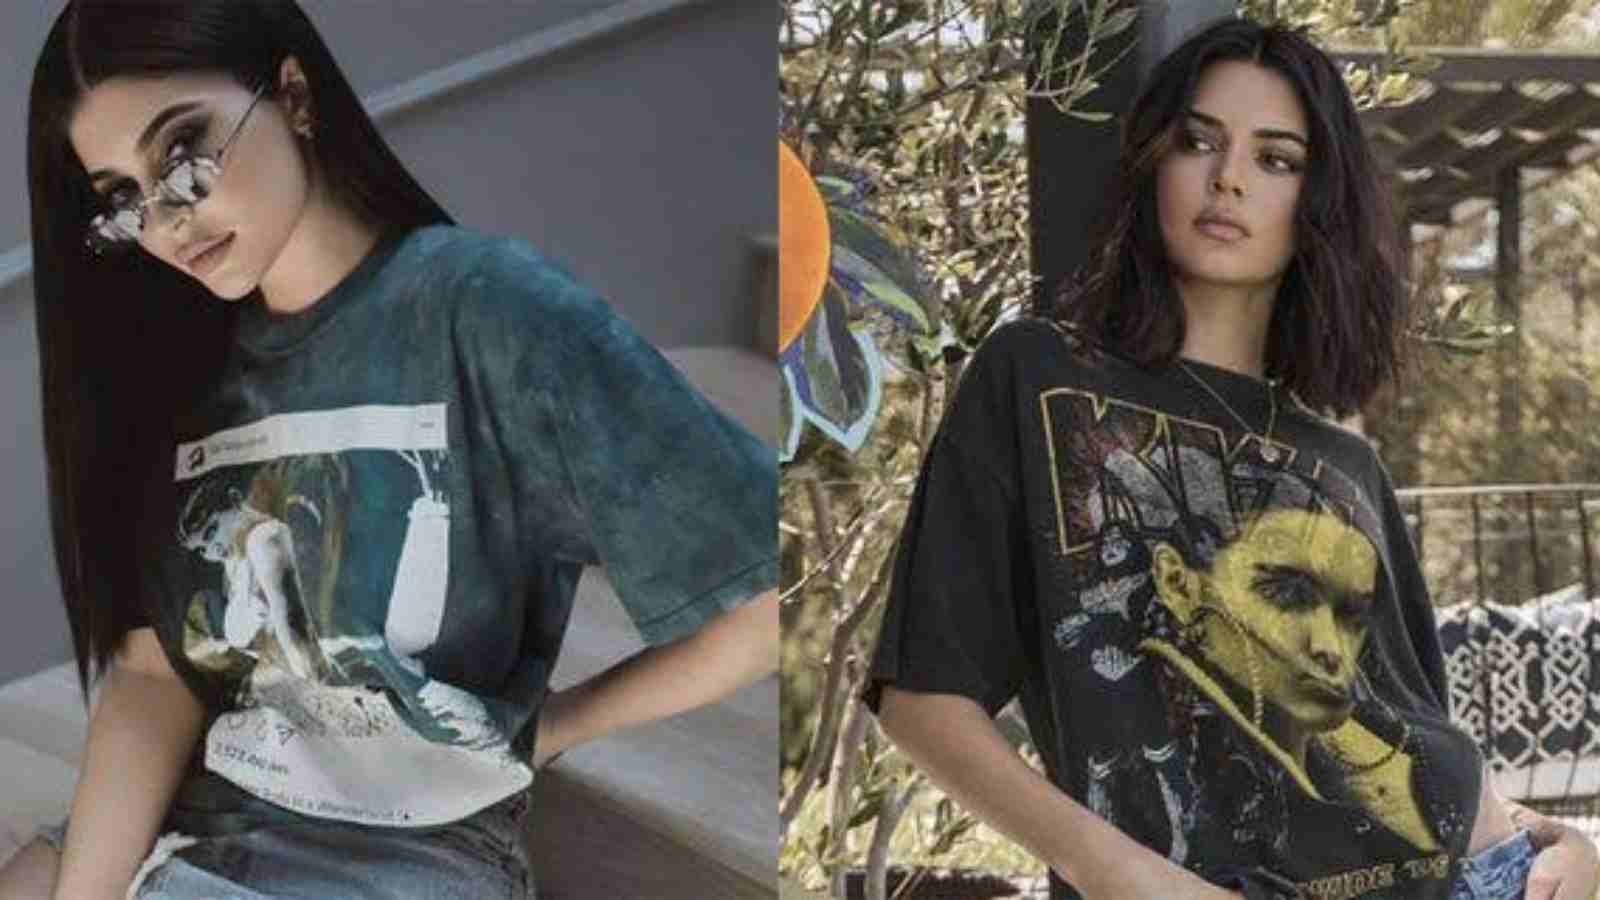 Kylie Jenner and Kendall Jenner wearing the controversial T-shirts